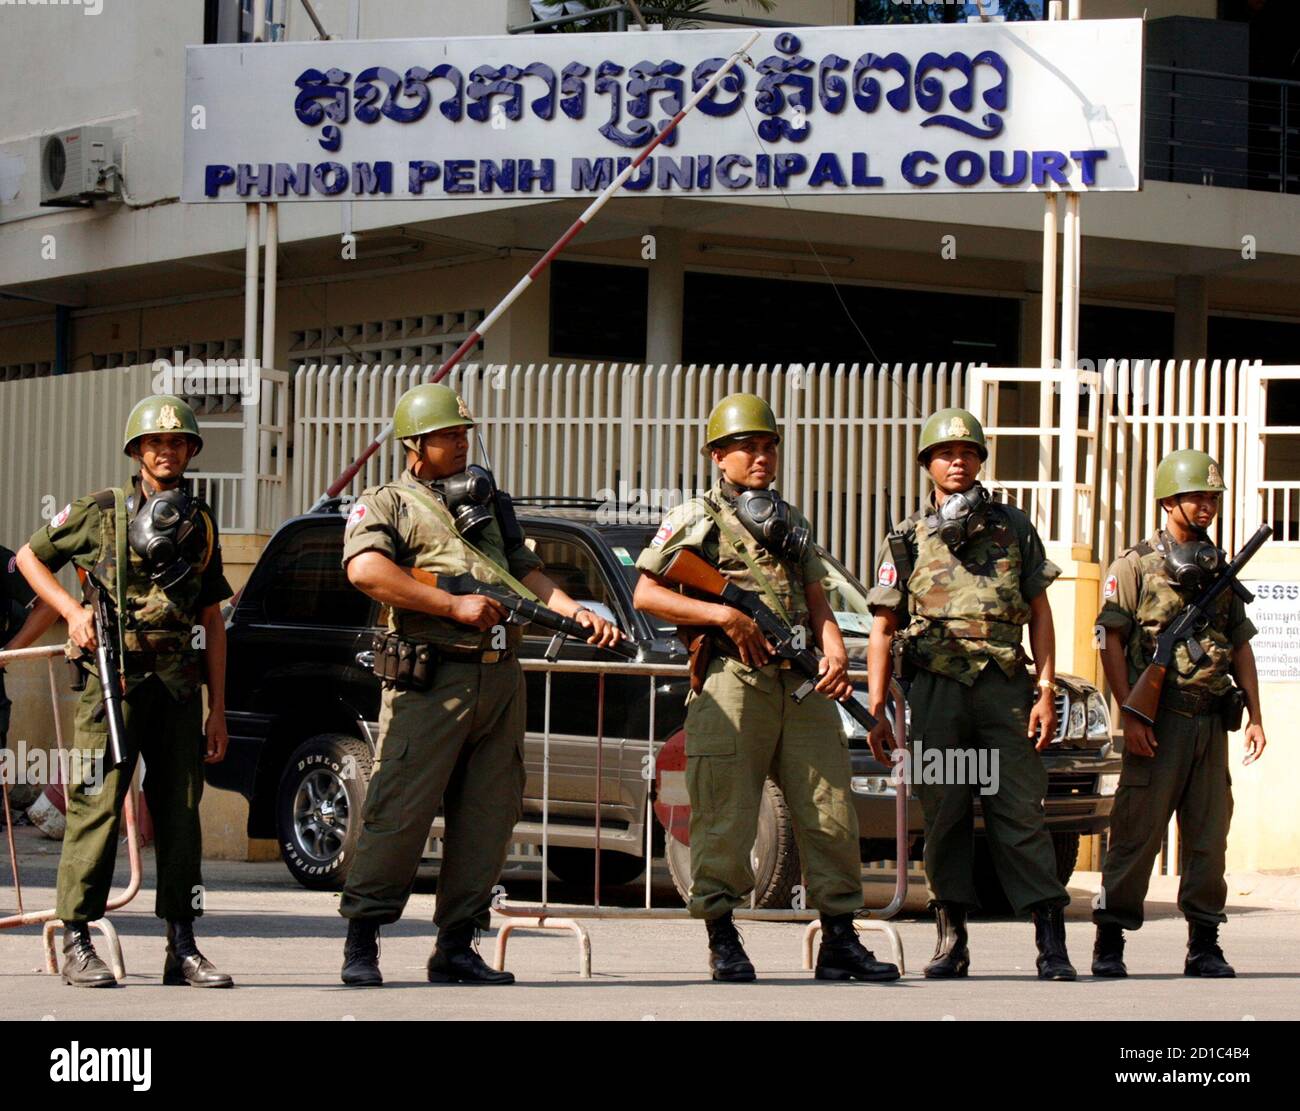 Cambodian riot police stand guard in front of a Phnom Penh municipal court,  where former Cambodia police chief Heng Pov is being charged, December 21,  2006. Heng Pov, a fugitive Cambodian former